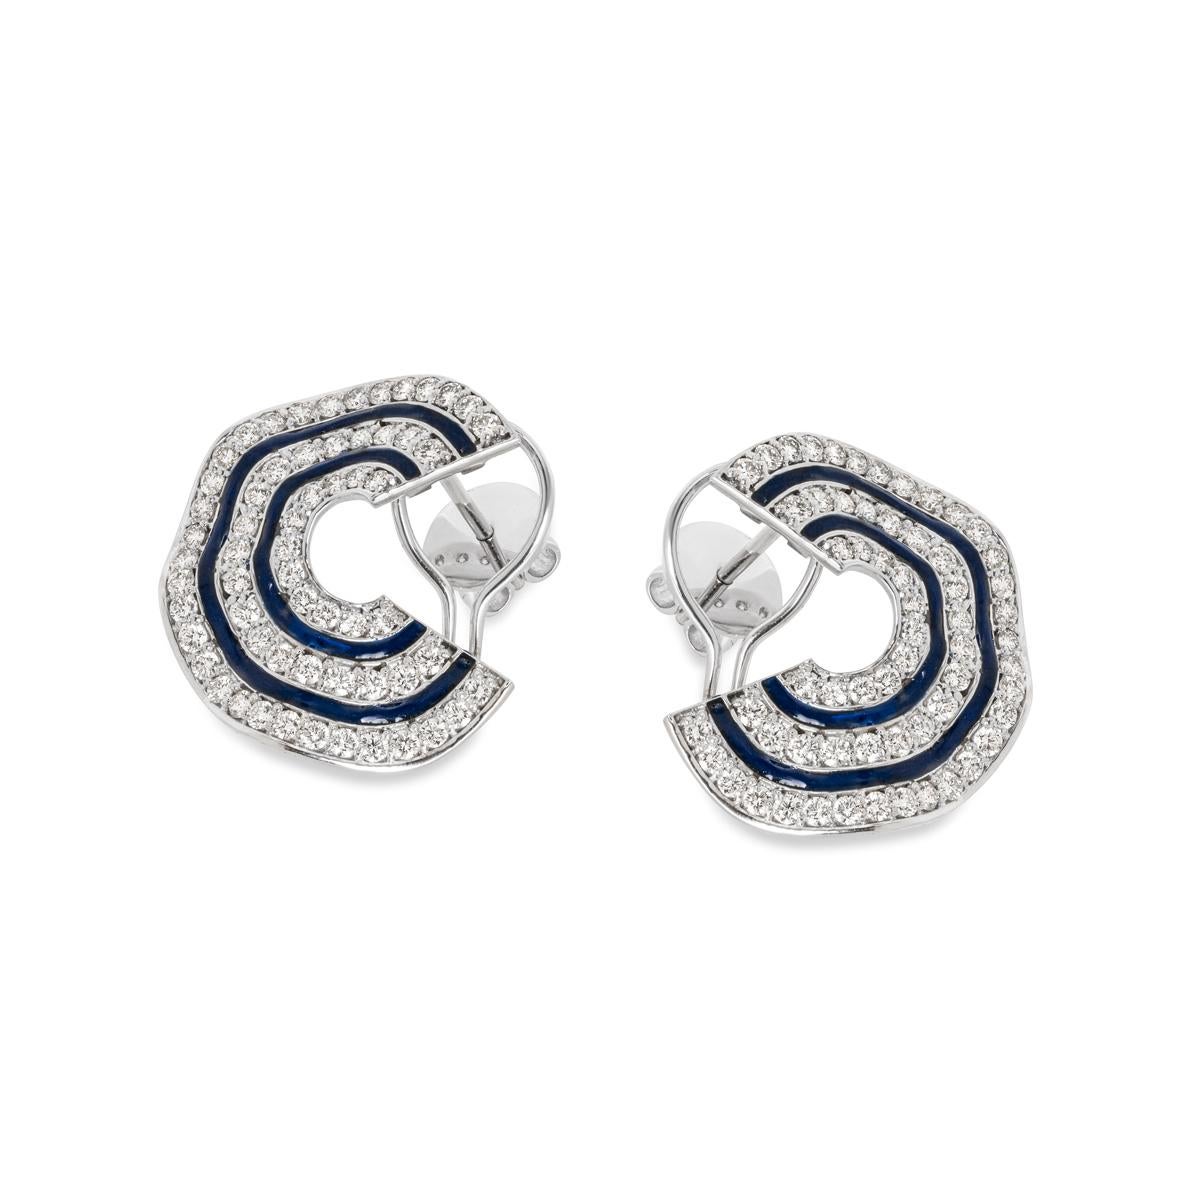 A beautiful pair of diamond and enamel earrings. The earrings are of a circular three dimensional wave design, set with a total of 122 round brilliant cut diamonds throughout 3 rows. The total diamond weight is approximately 3.28ct, G-H colour and